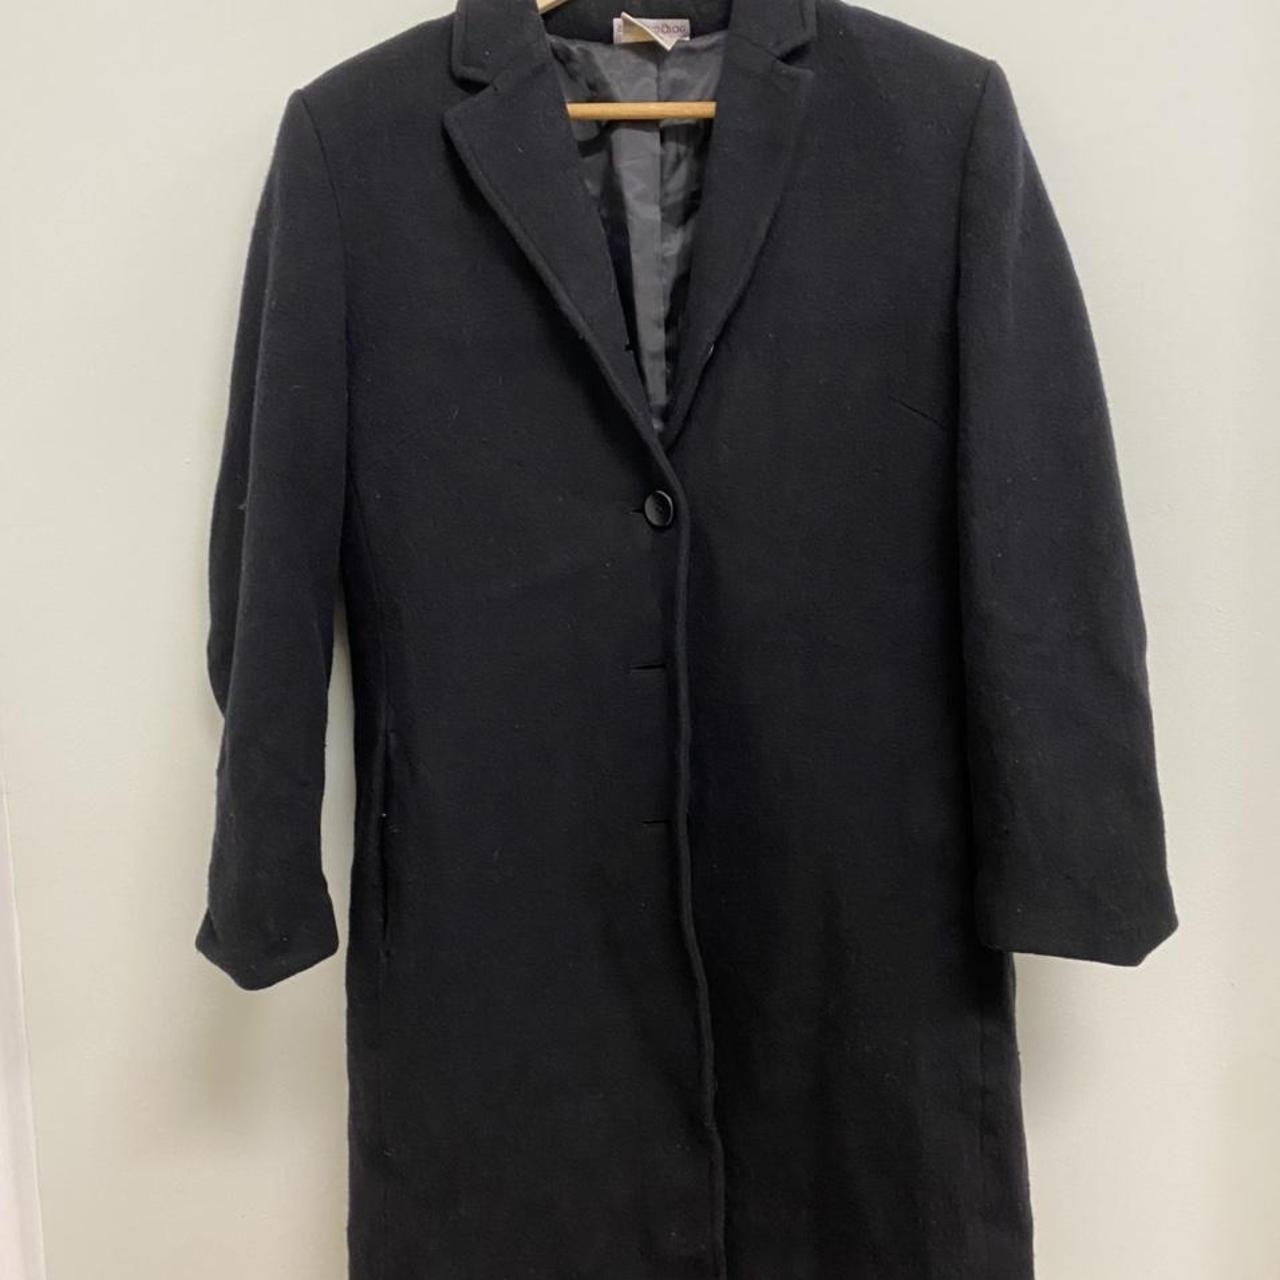 REPOP! Preloved wool coat marked a size 12 but would... - Depop